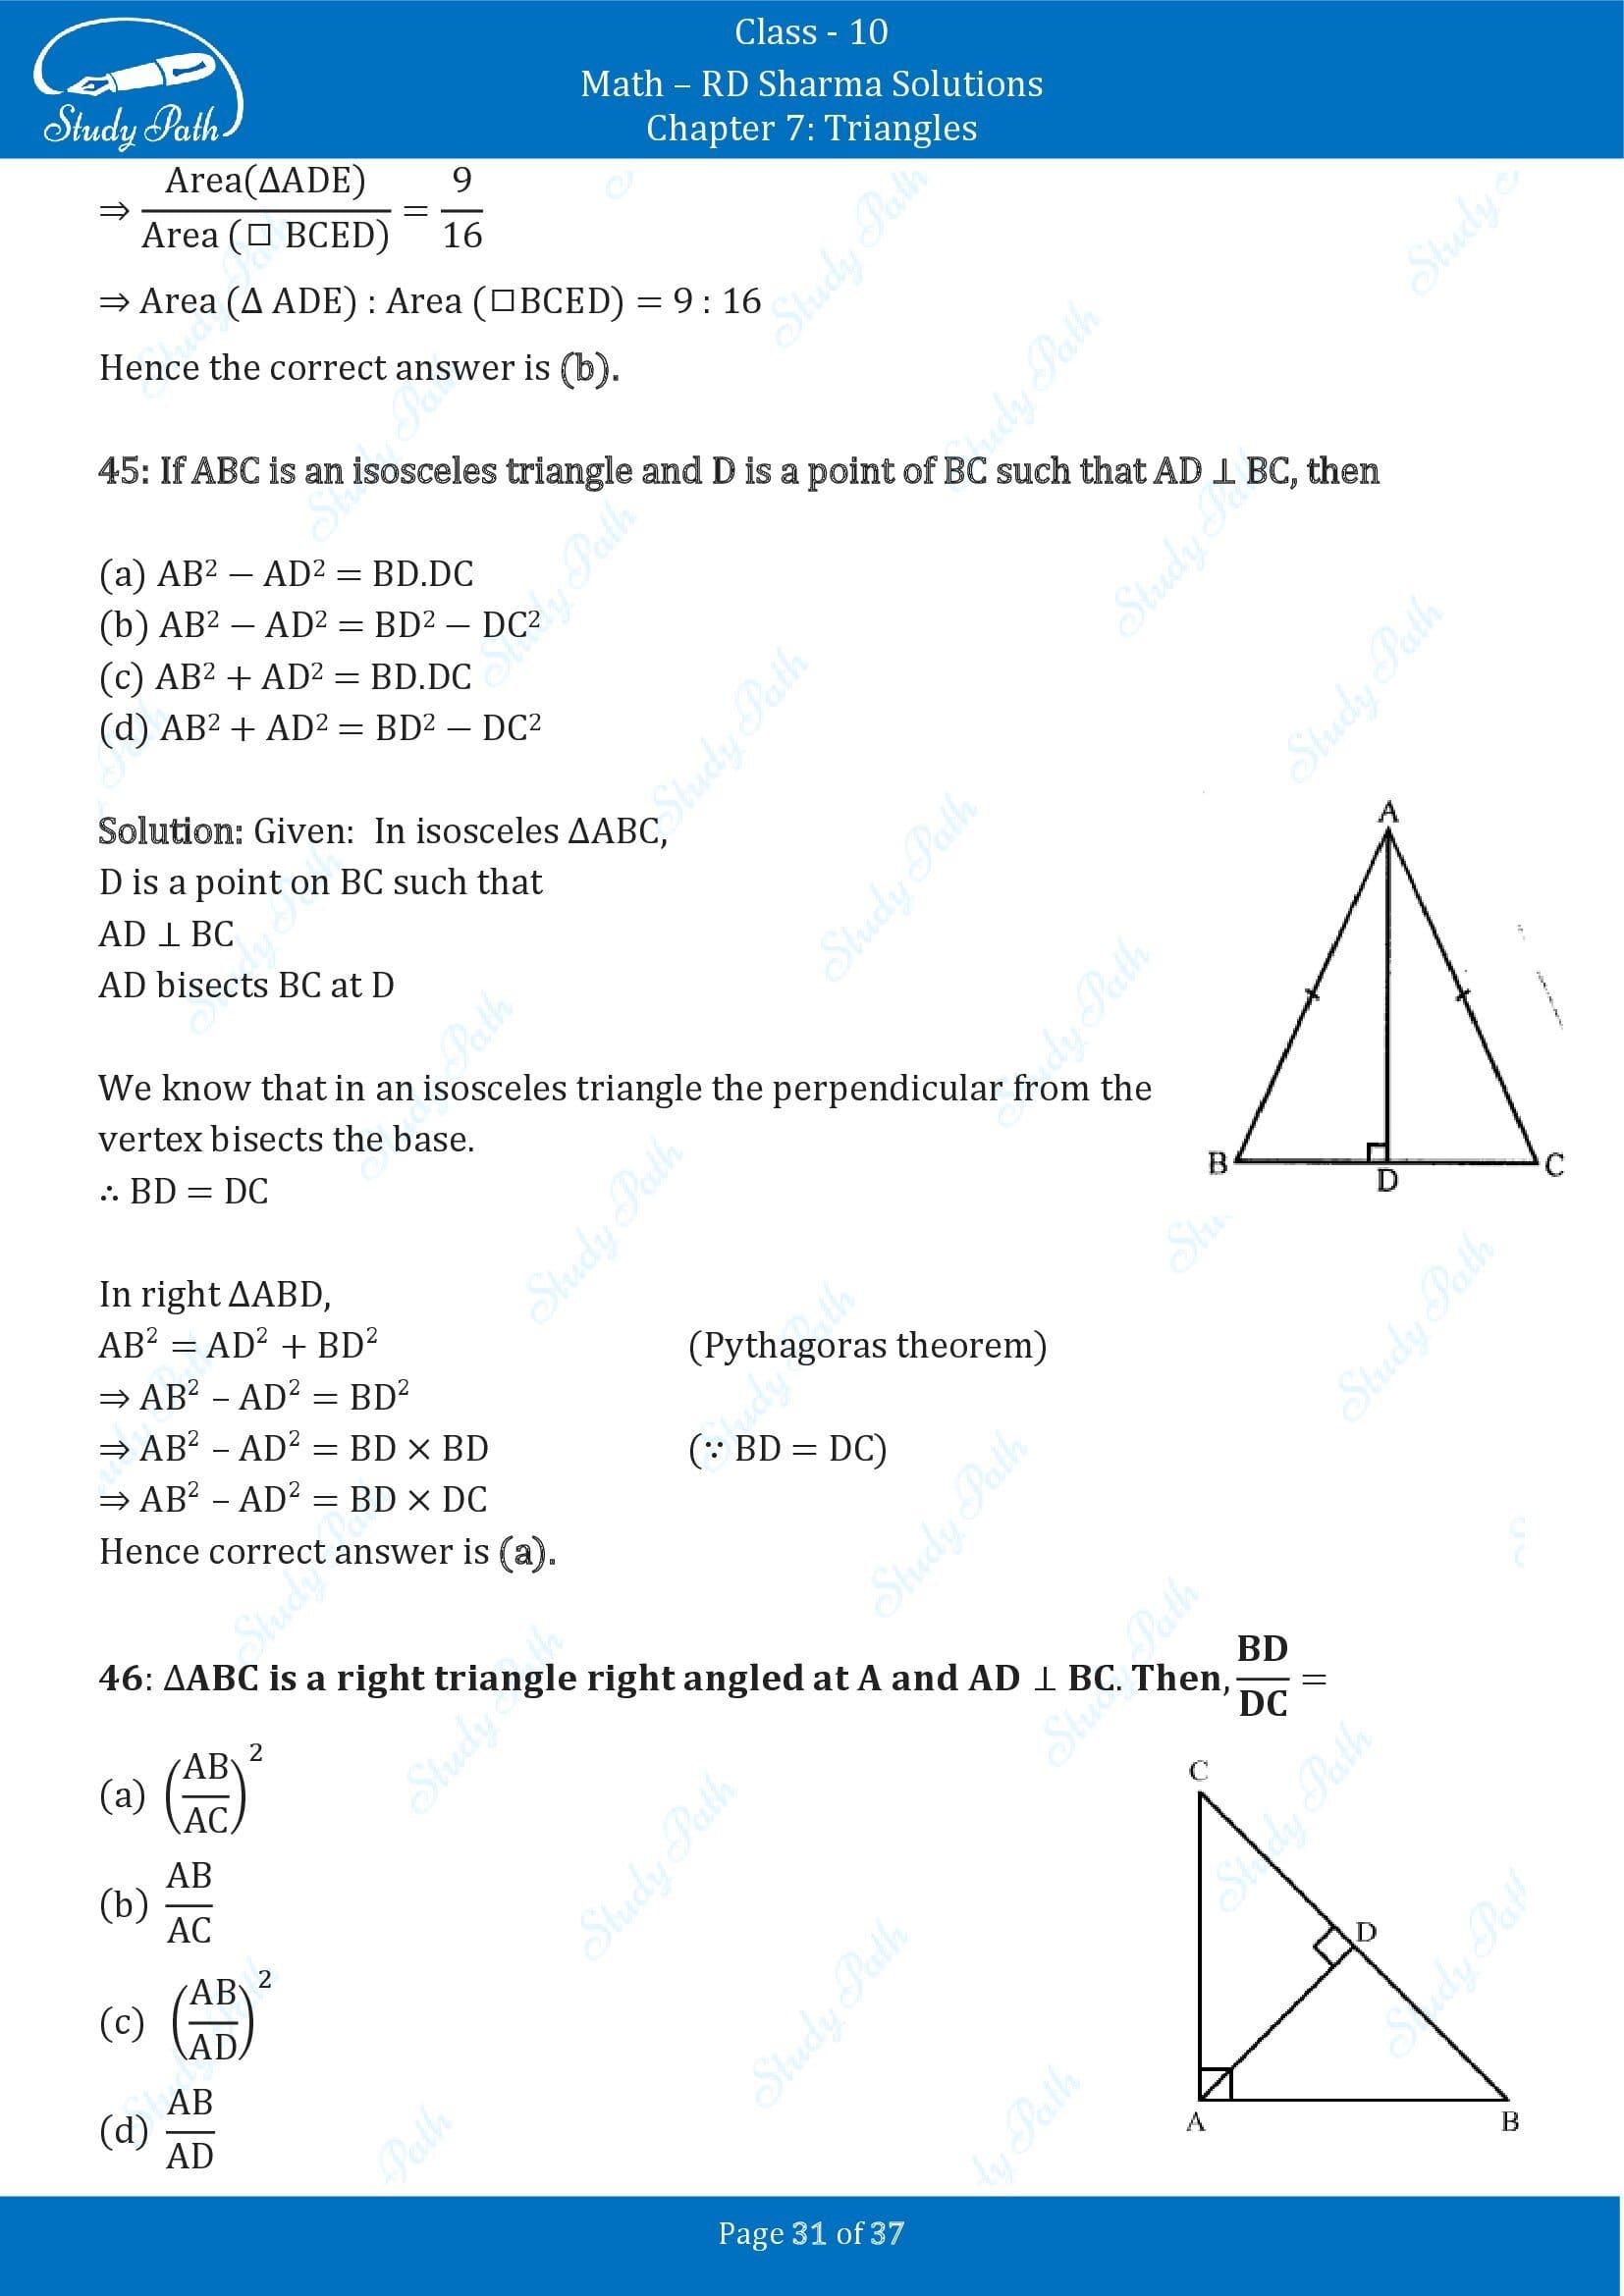 RD Sharma Solutions Class 10 Chapter 7 Triangles Multiple Choice Question MCQs 00031